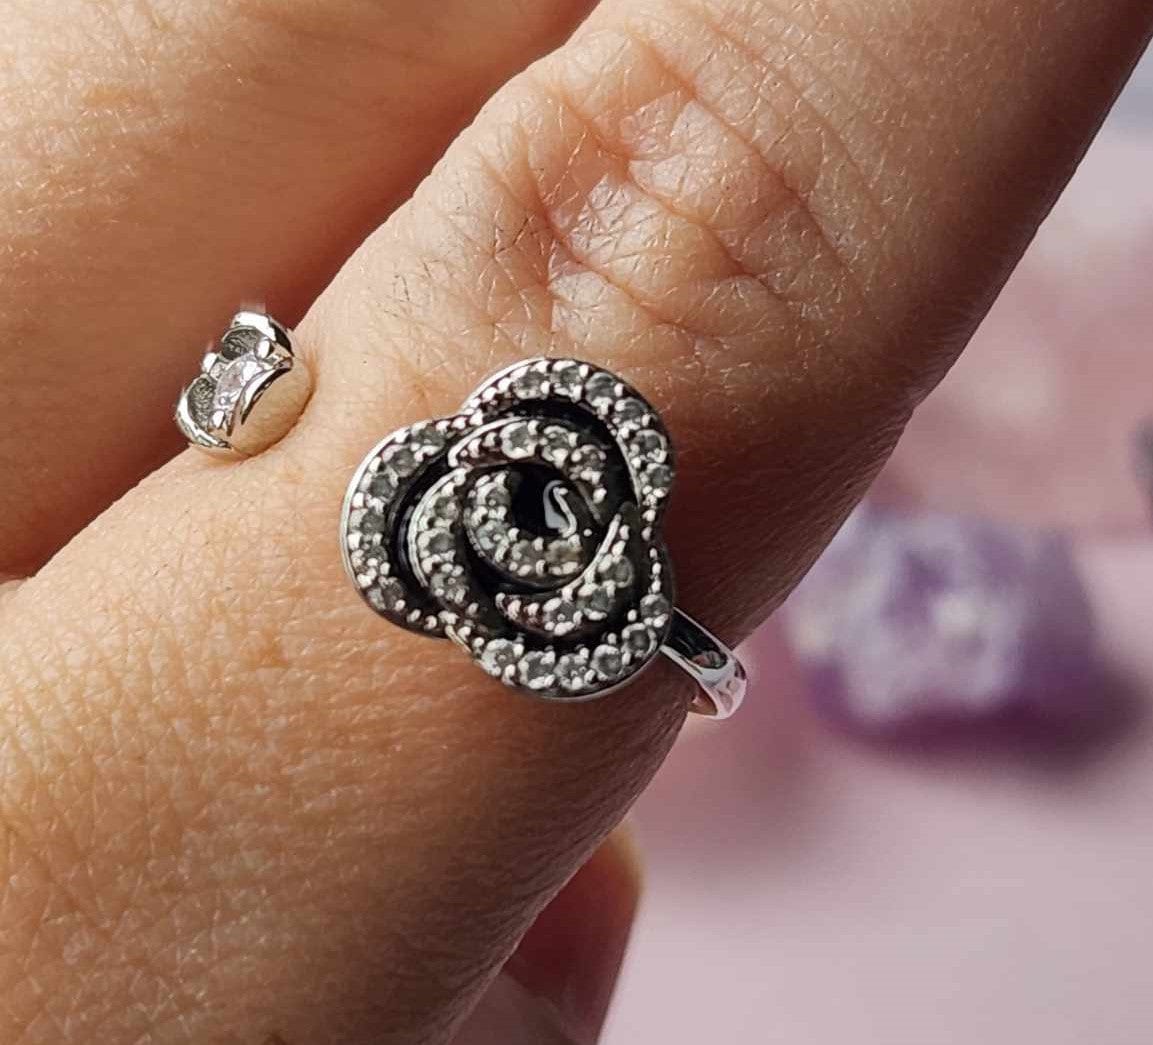 The Rose Collection - Sterling Silver Fidget Spinner Ring